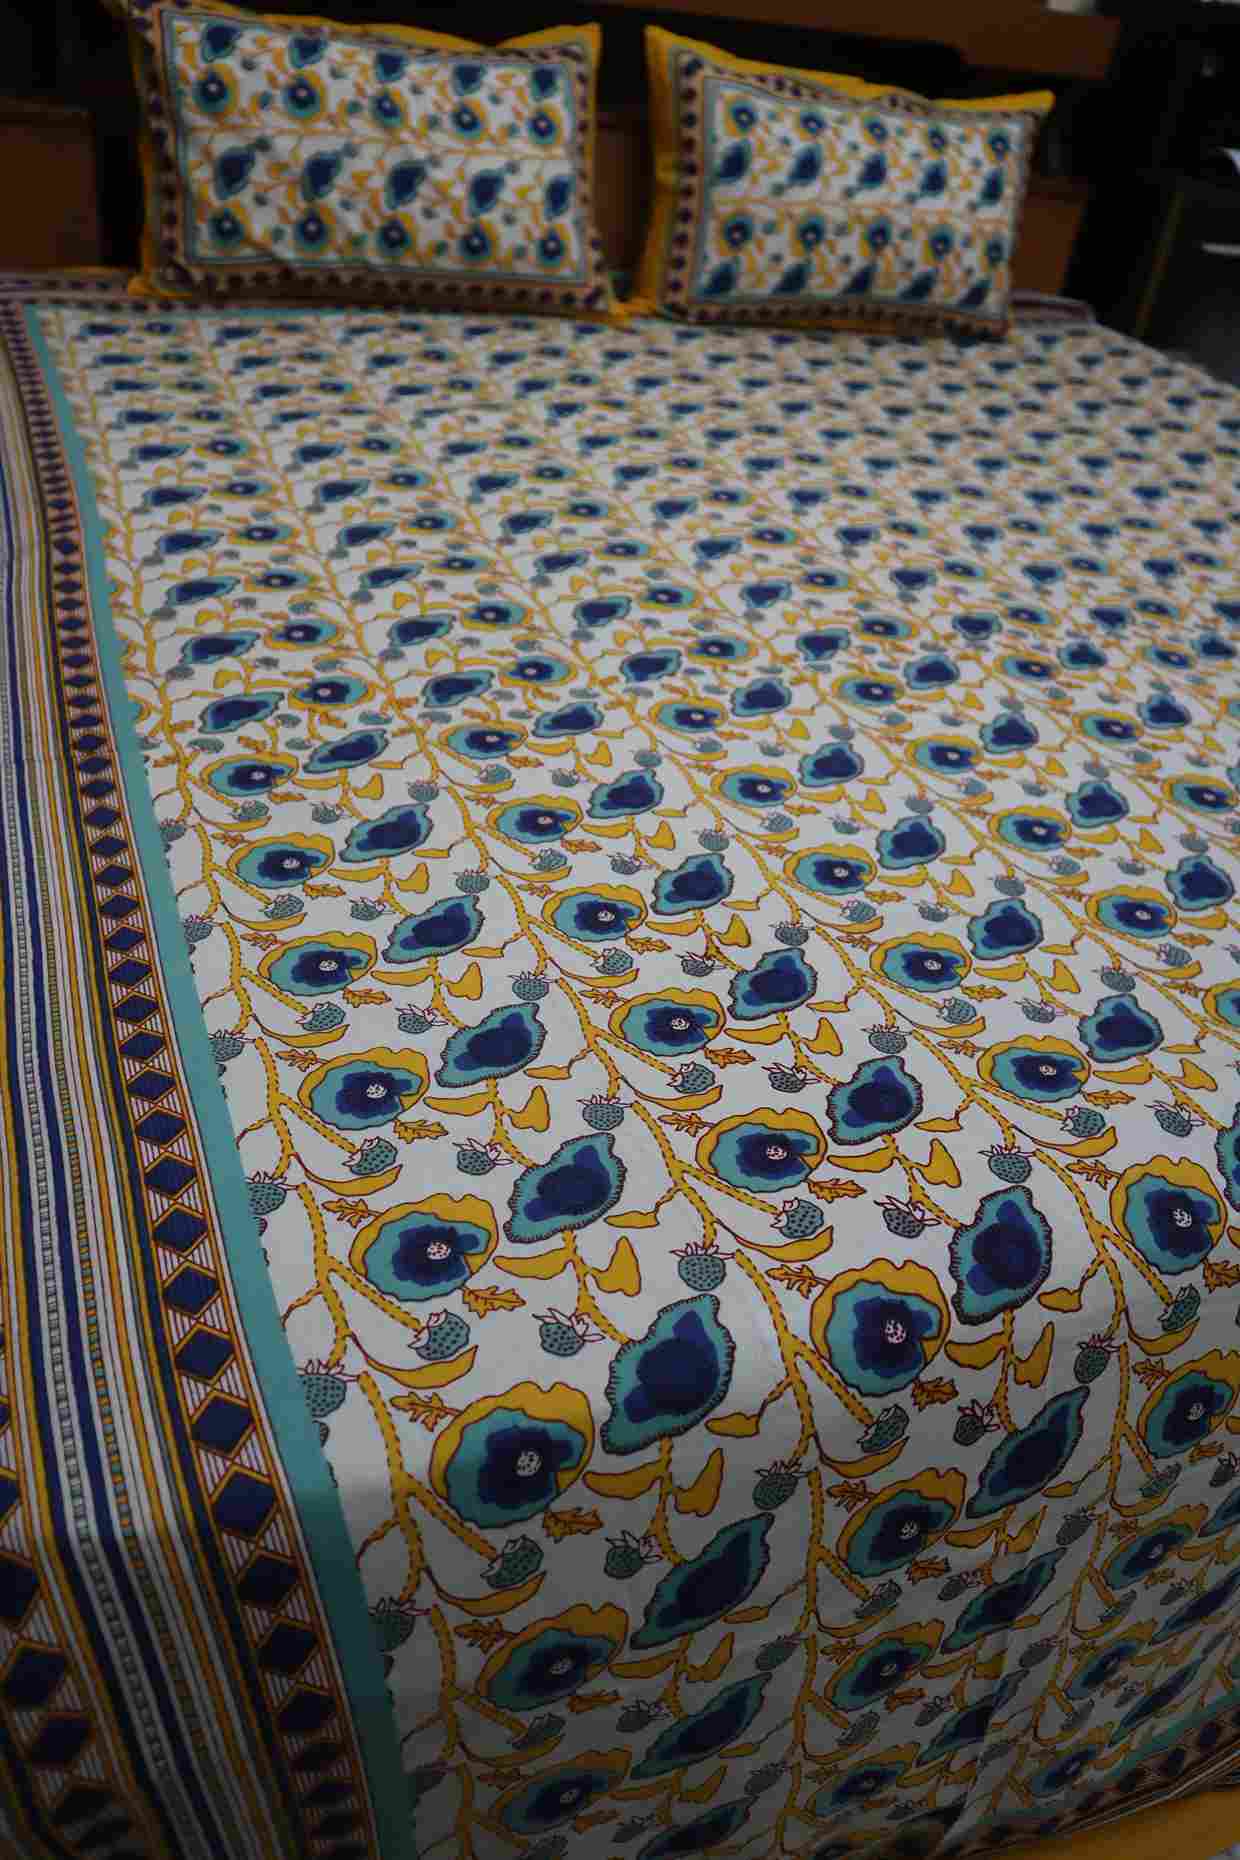 Multicolor Pure Cotton Jaipuri Bedsheets for Double Bed with Pillow Covers, 90" x 108" King Size, 180 TC, Breathable and Skin Friendly